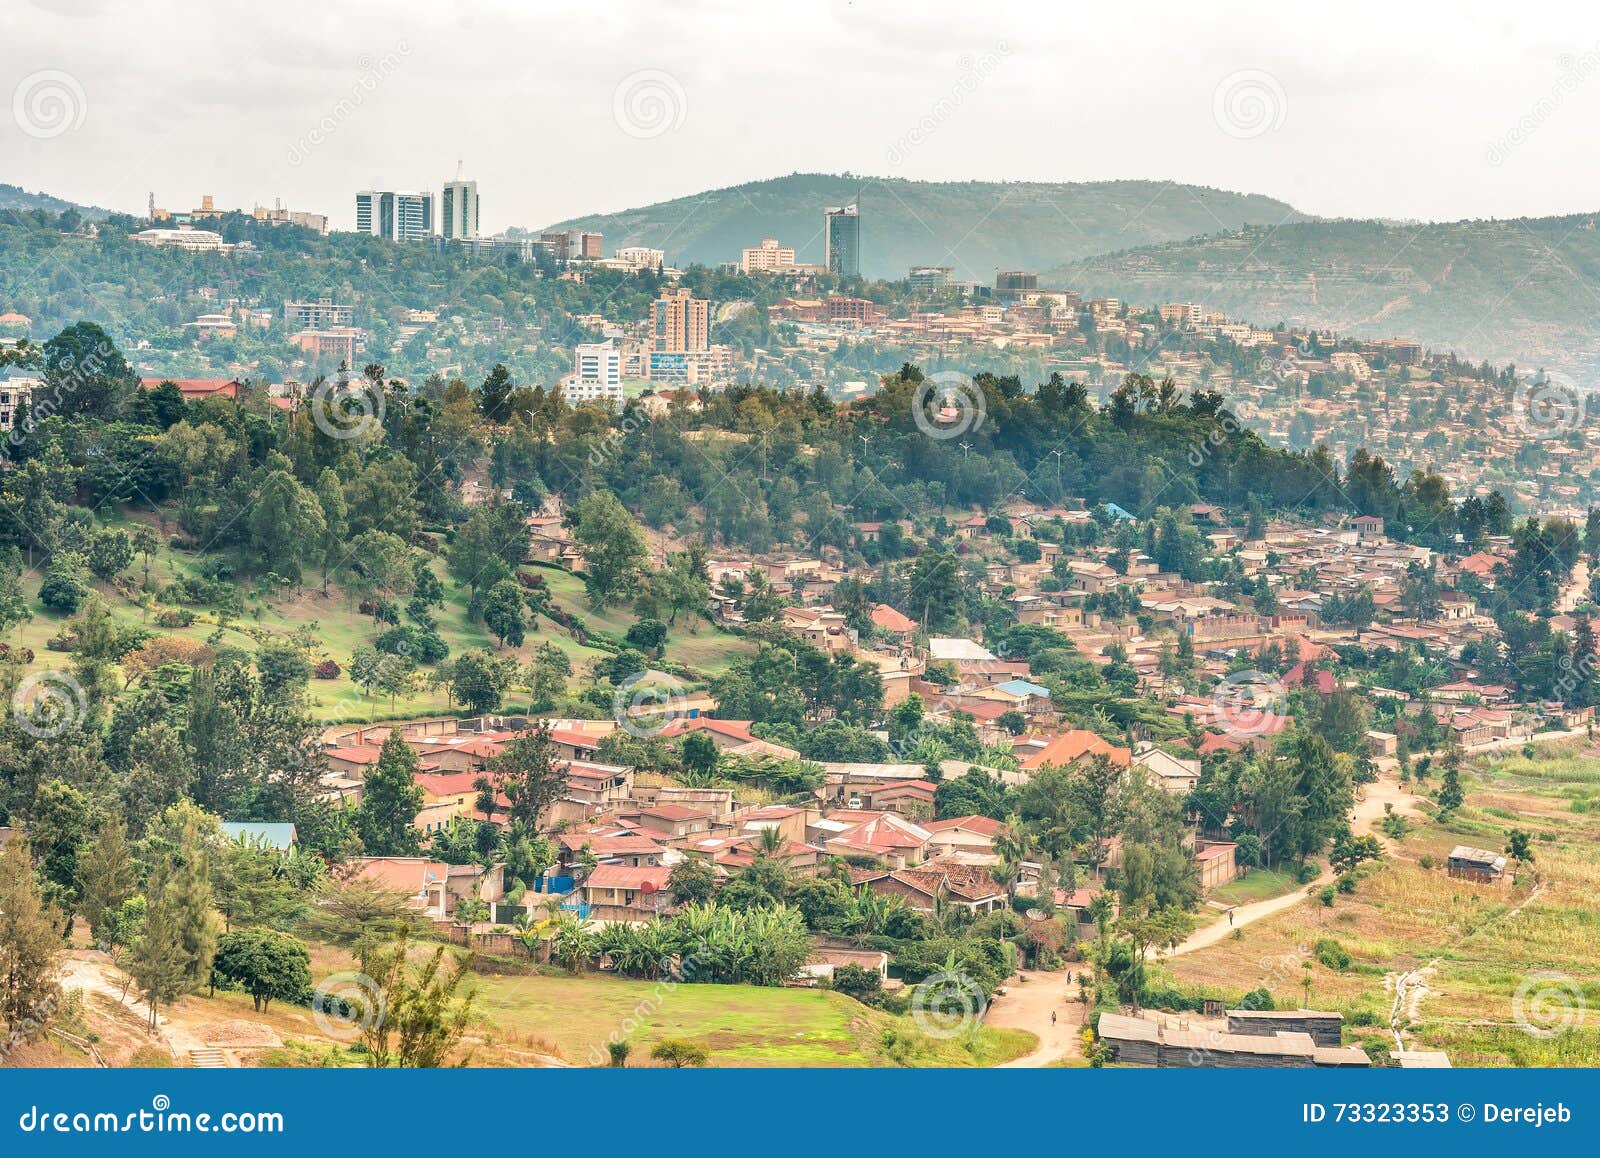 aerial view of kigali from a distance